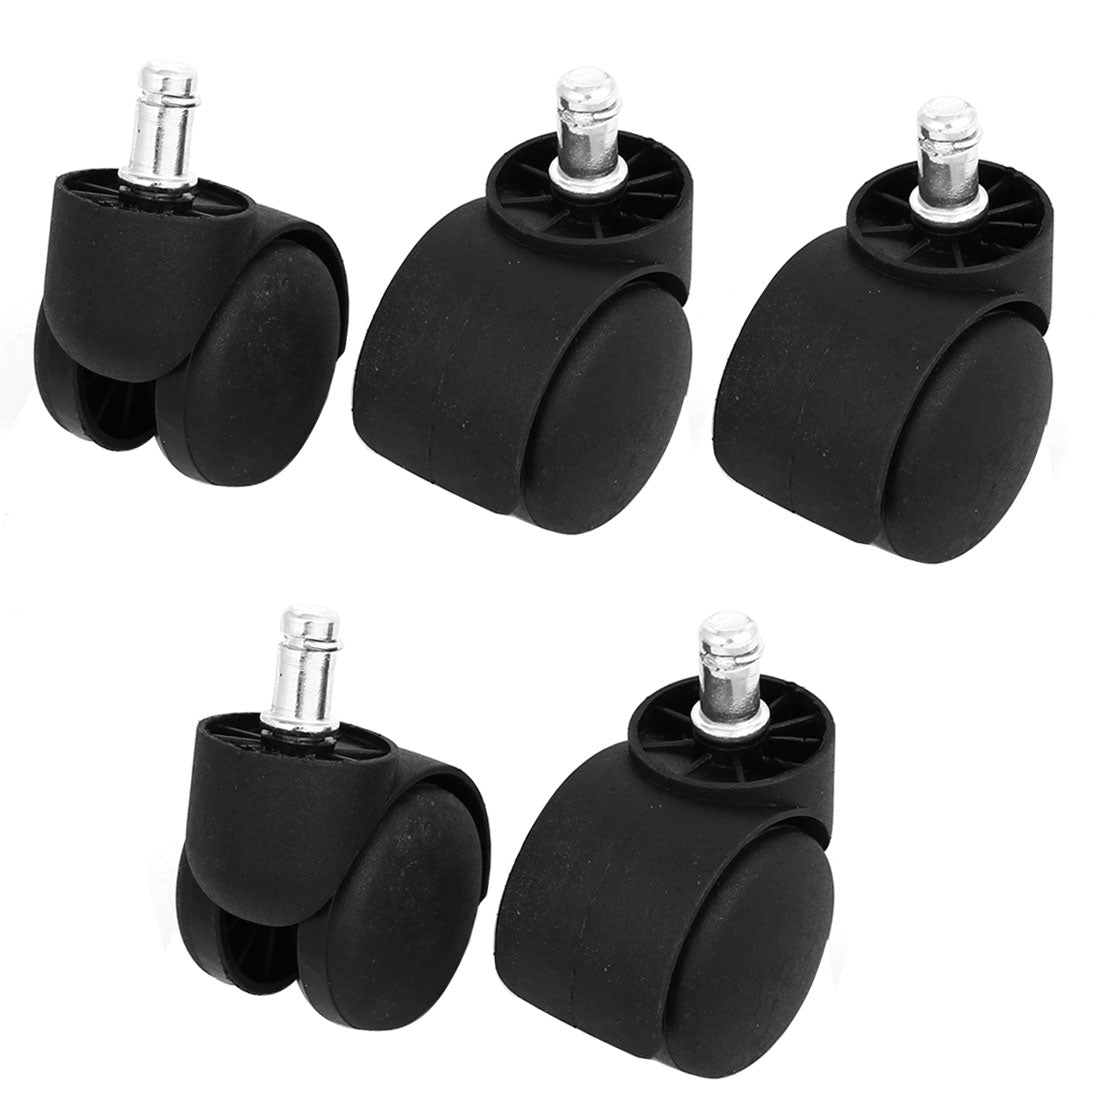 uxcell Uxcell 11mm x 22mm Grip Ring Stem Office Chair Swivel Twin Wheel Caster Replacement 5 Pcs